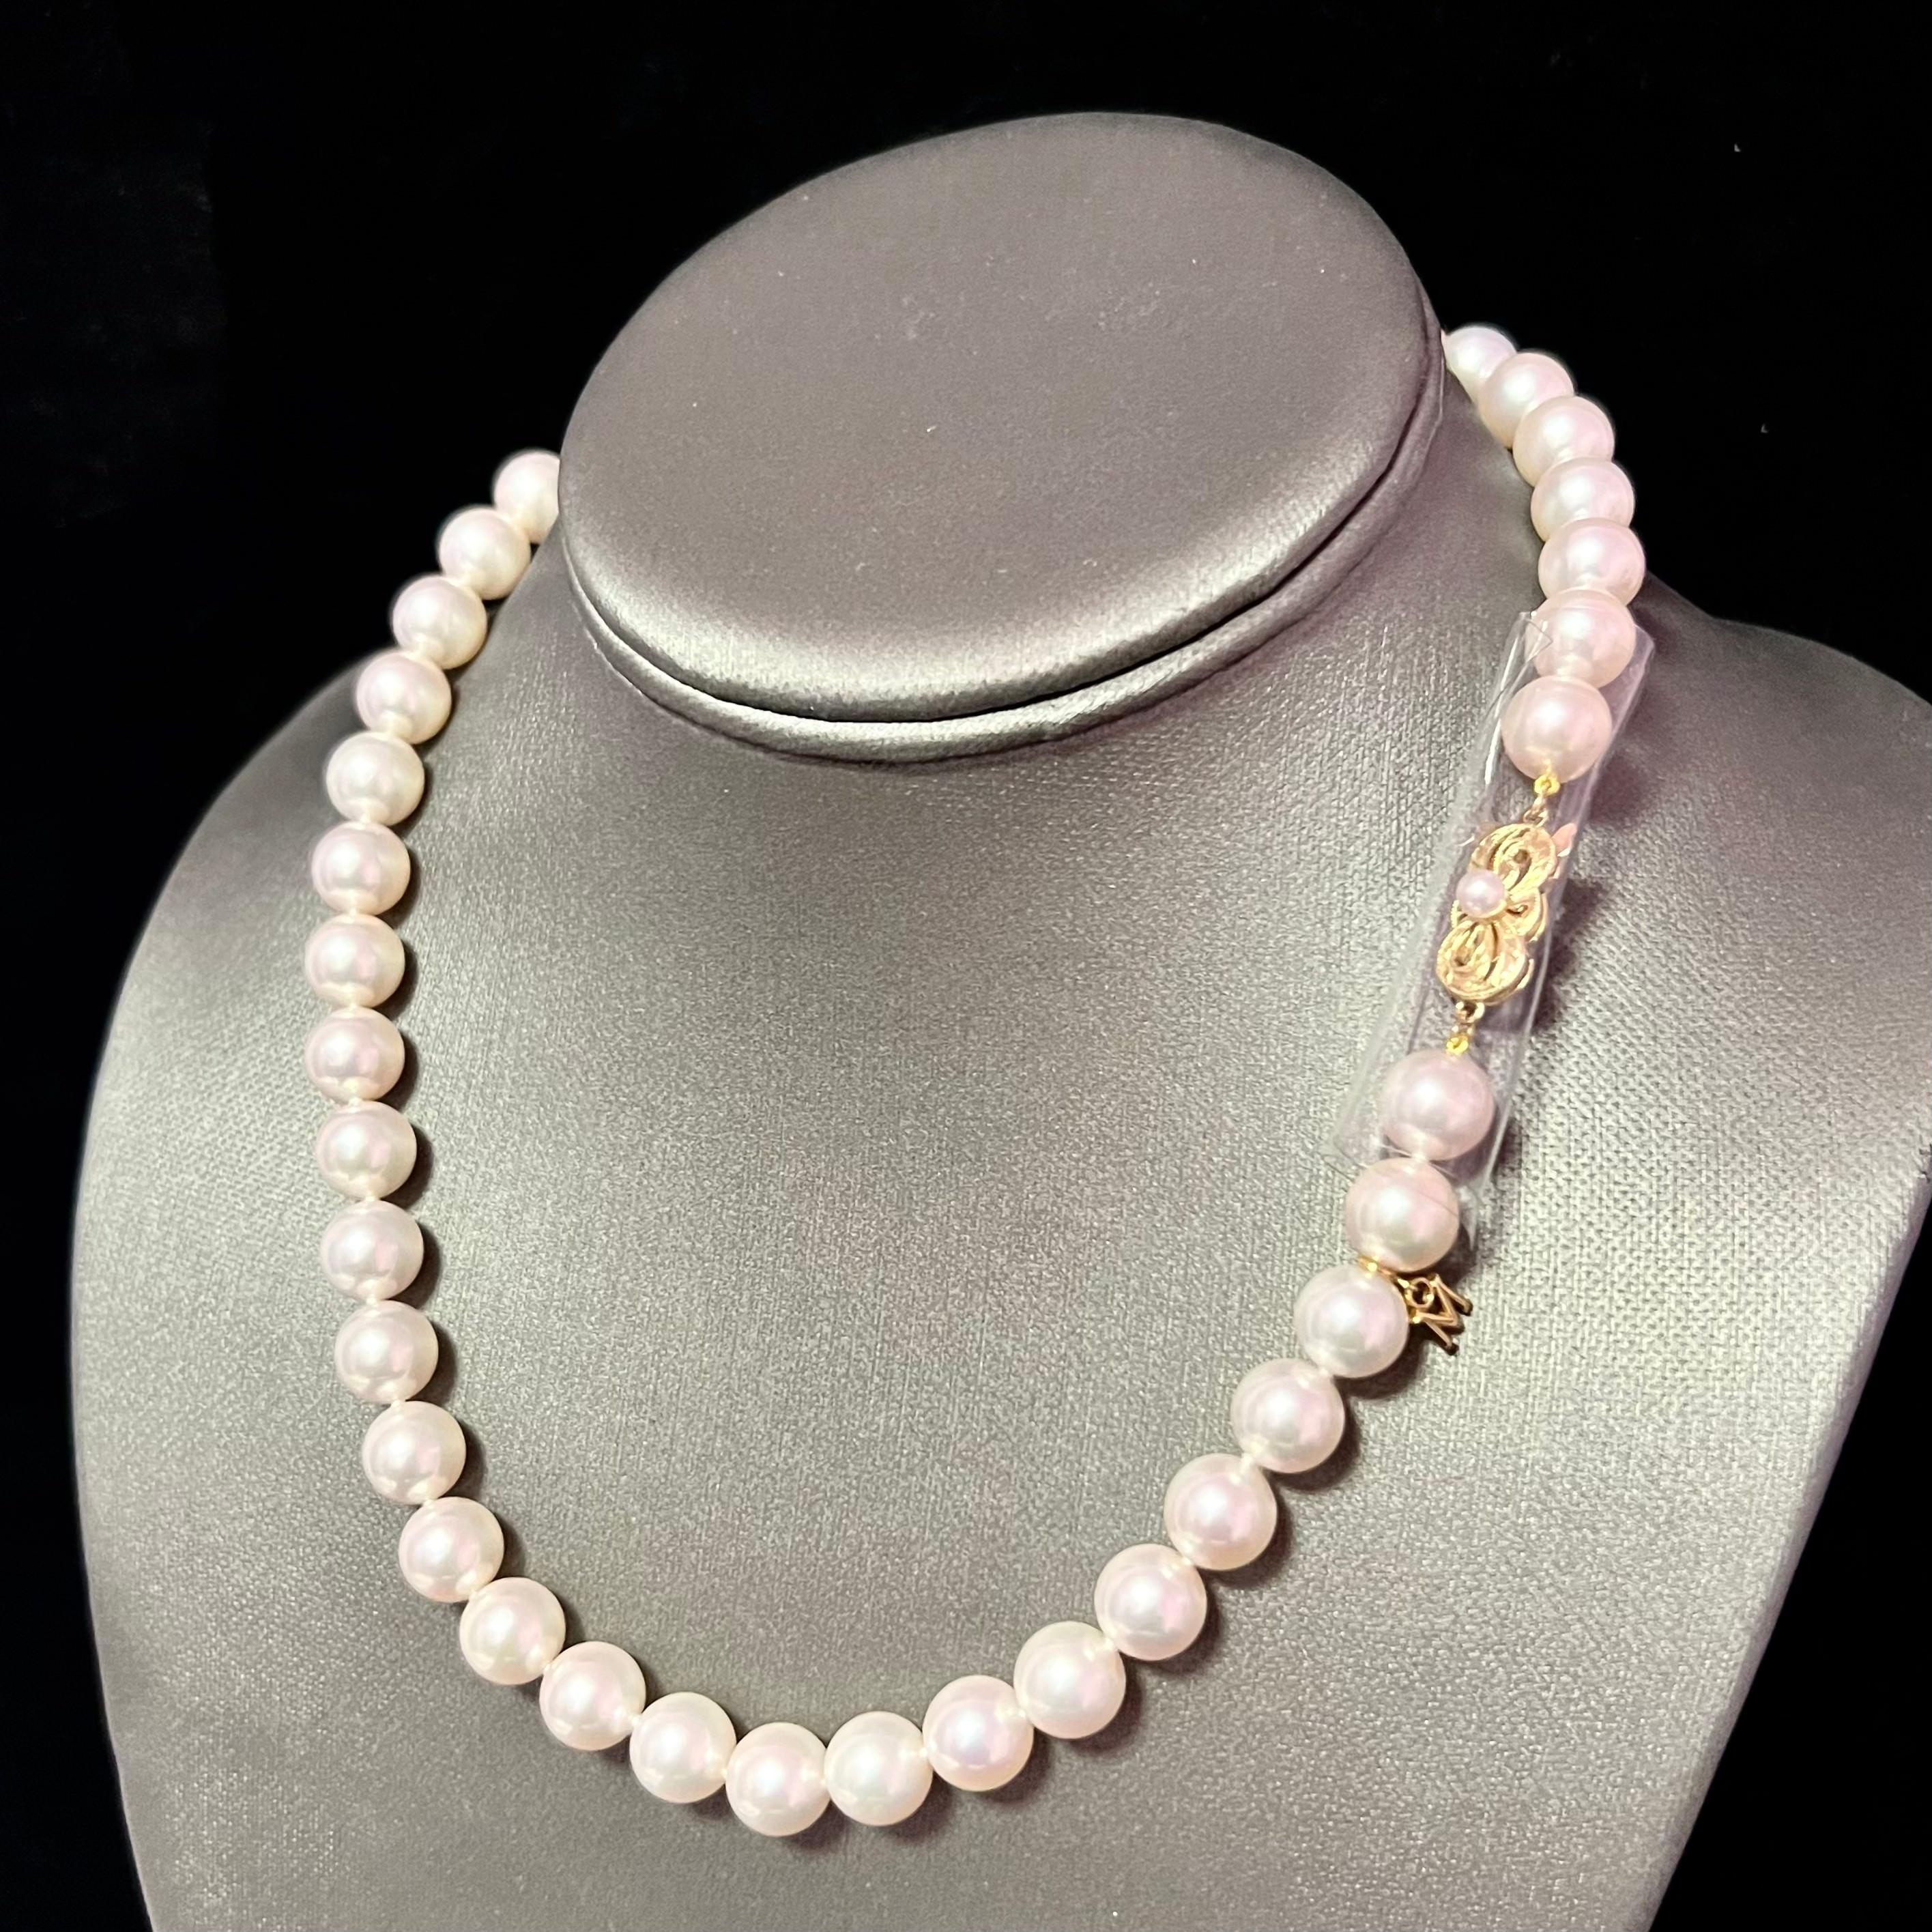 Mikimoto Estate Akoya Pearl Necklace 18k Gold 9.5 mm Certified M35435 For Sale 1